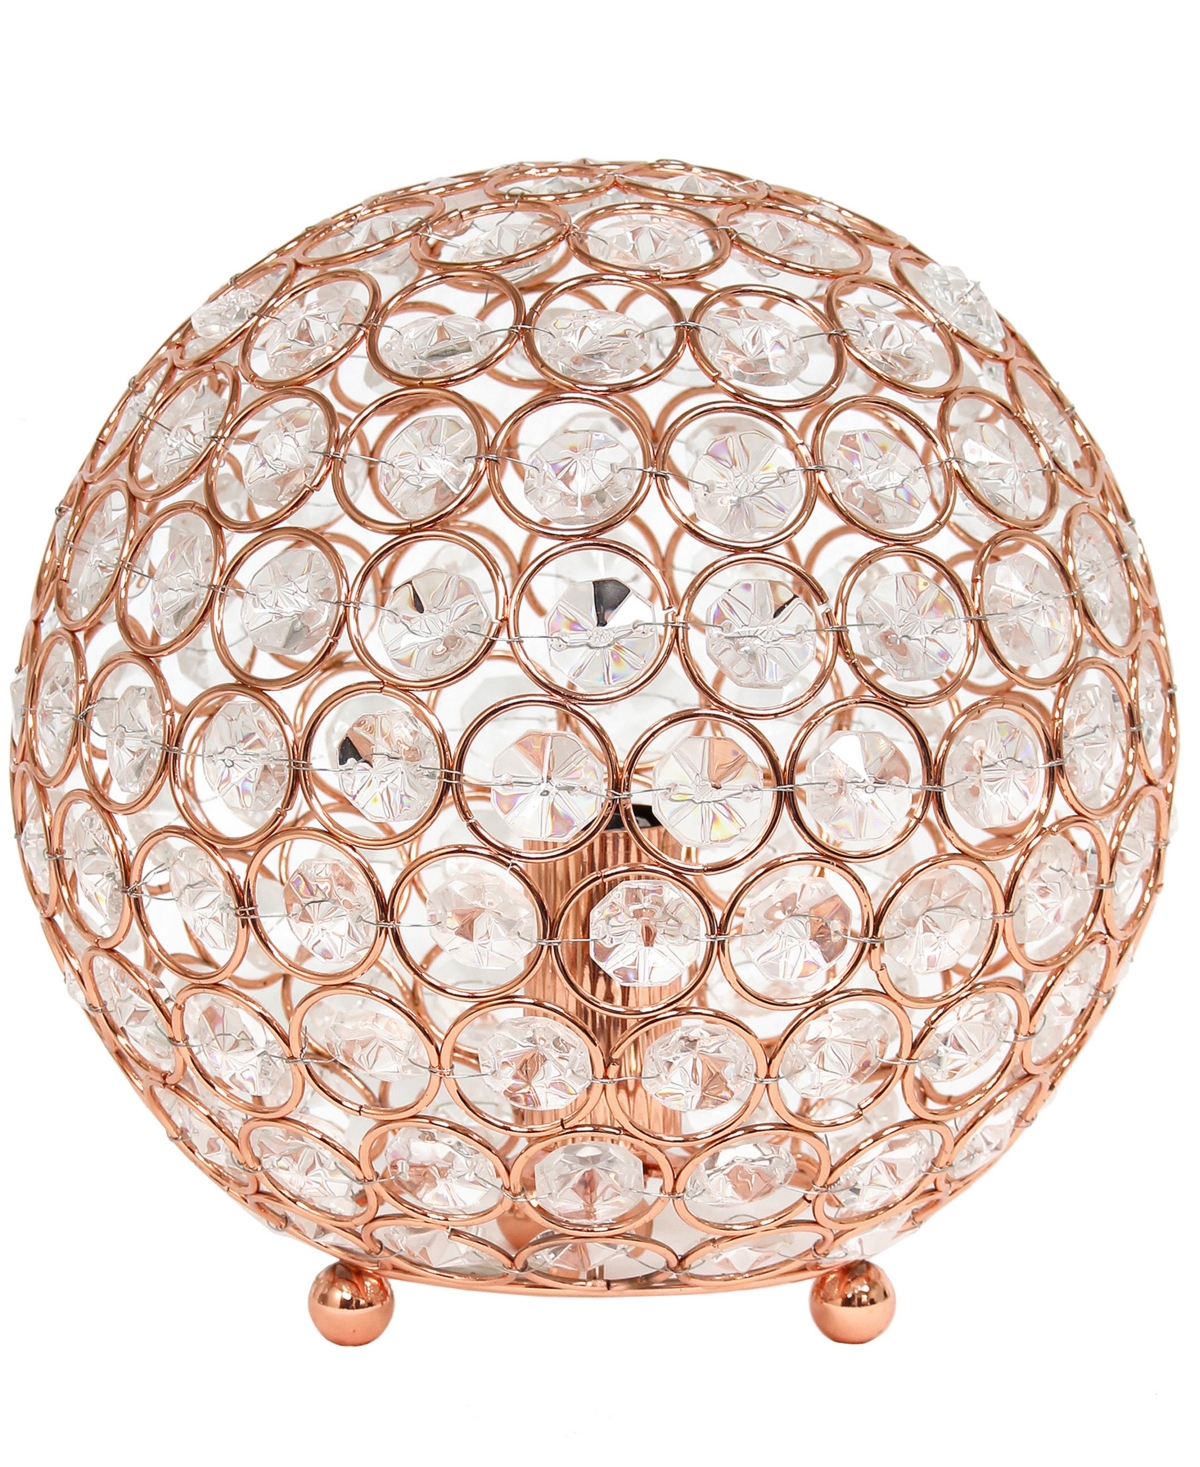 All The Rages Lalia Home Elipse 8" Metal Crystal Orb Table Lamp In Rose Gold